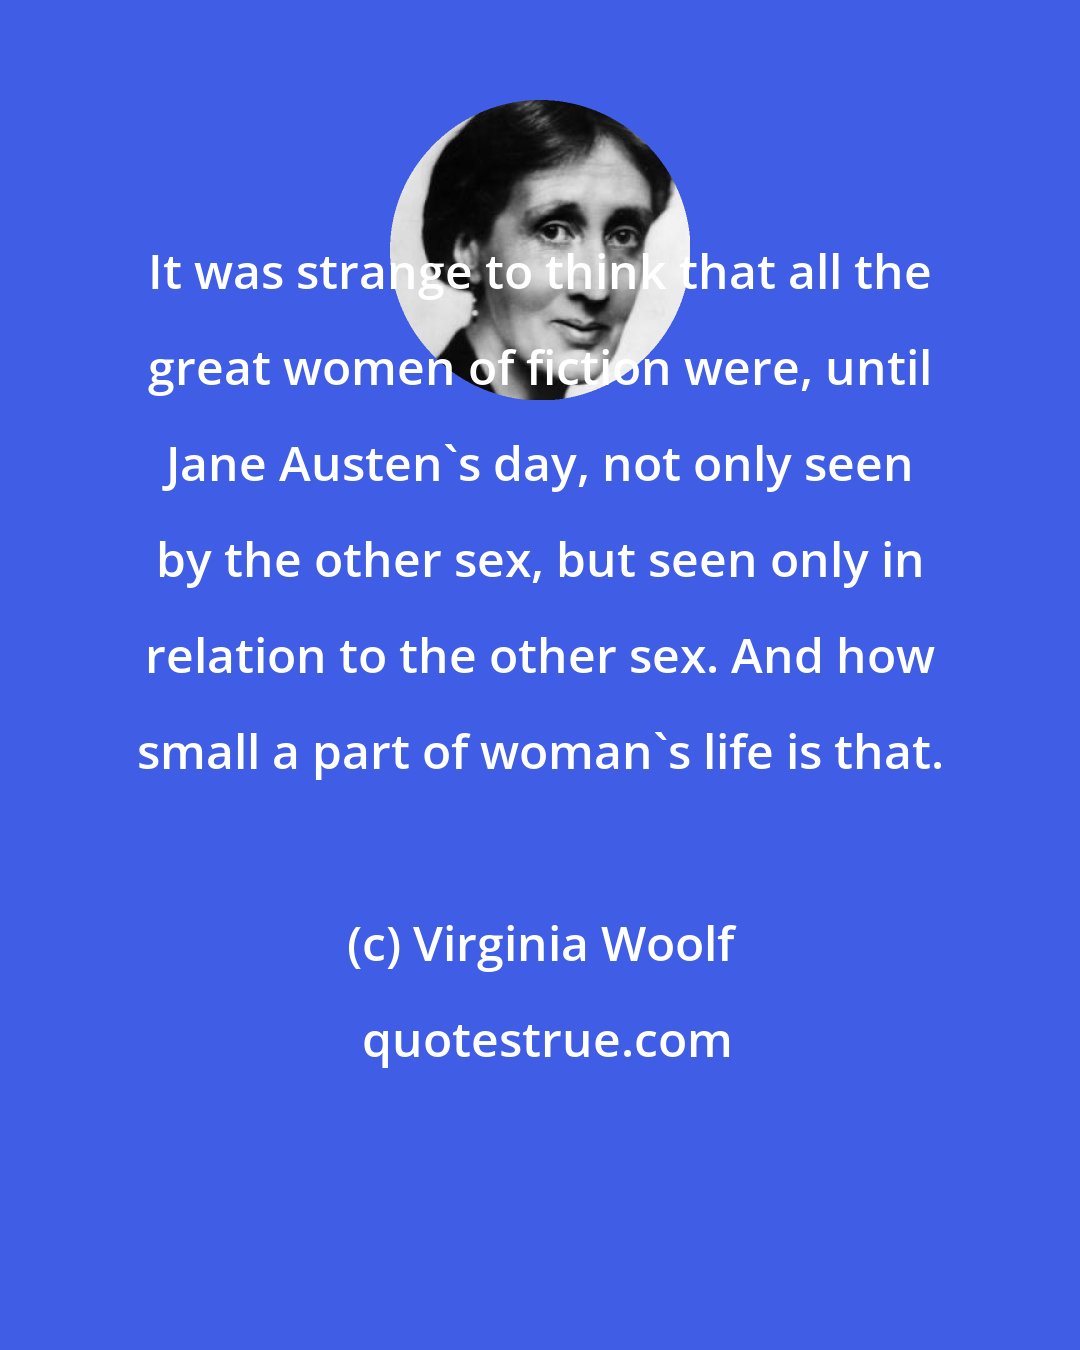 Virginia Woolf: It was strange to think that all the great women of fiction were, until Jane Austen's day, not only seen by the other sex, but seen only in relation to the other sex. And how small a part of woman's life is that.